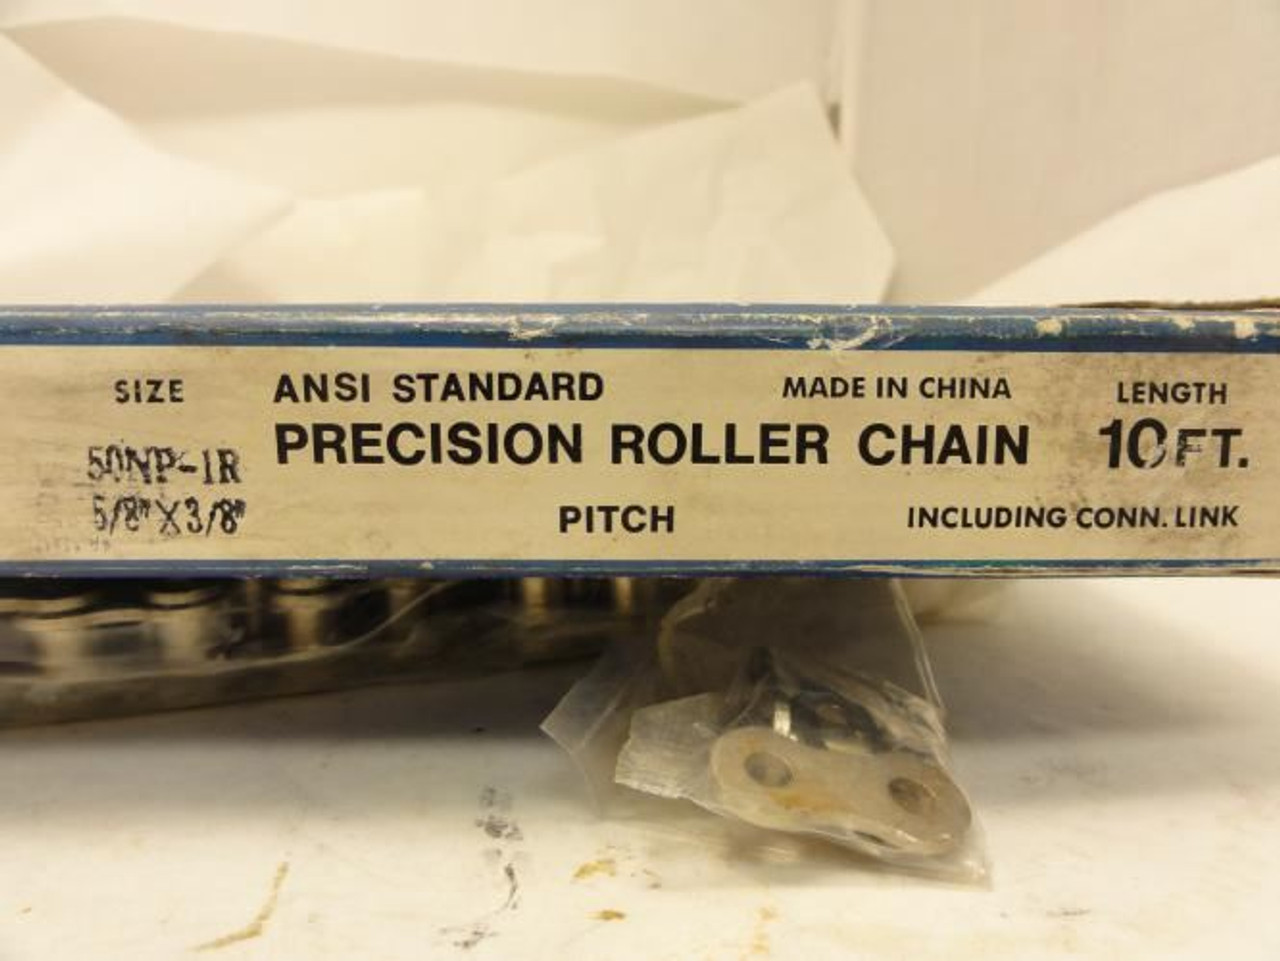 Allied-Locke 50NP-1R;  Precision Roller Chain # 50; 5/8" Pitch